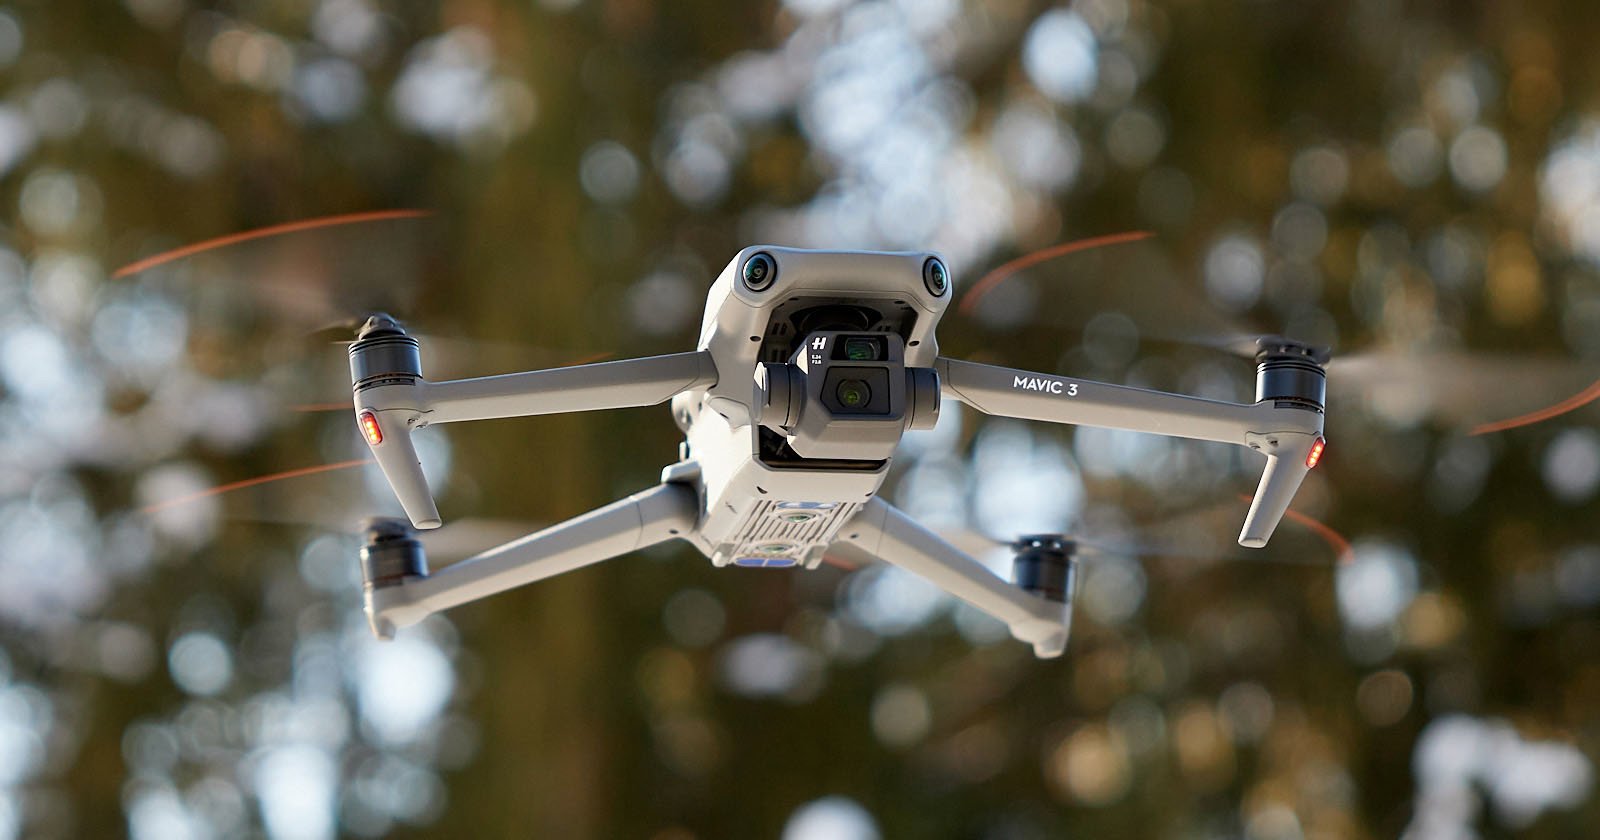 Stringent Texas Anti-Drone Law Overturned in Federal Court